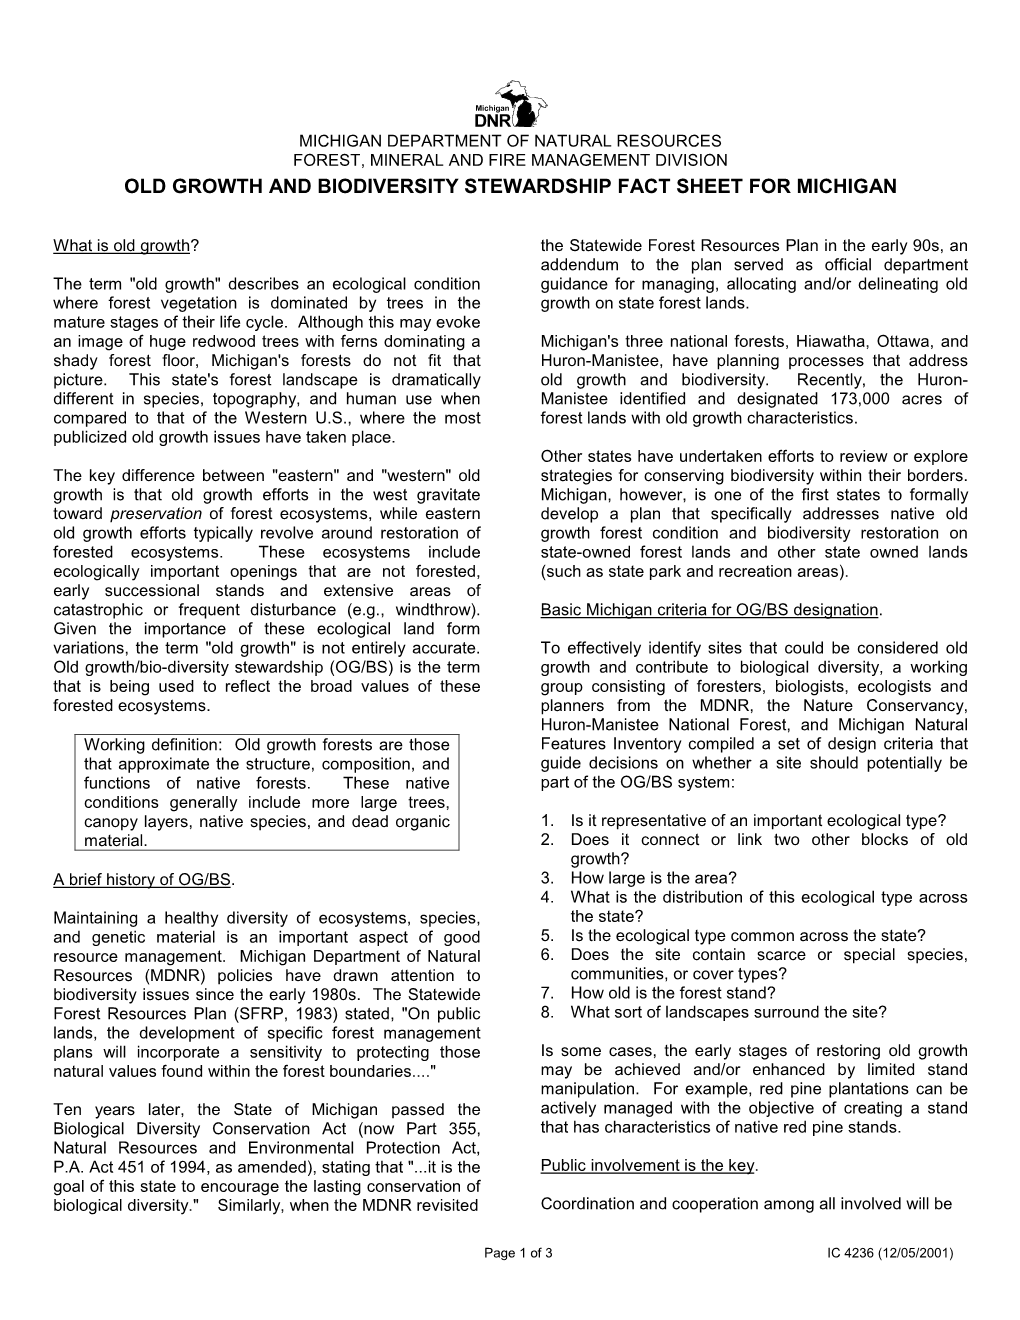 Old Growth and Biodiversity Stewardship Fact Sheet for Michigan